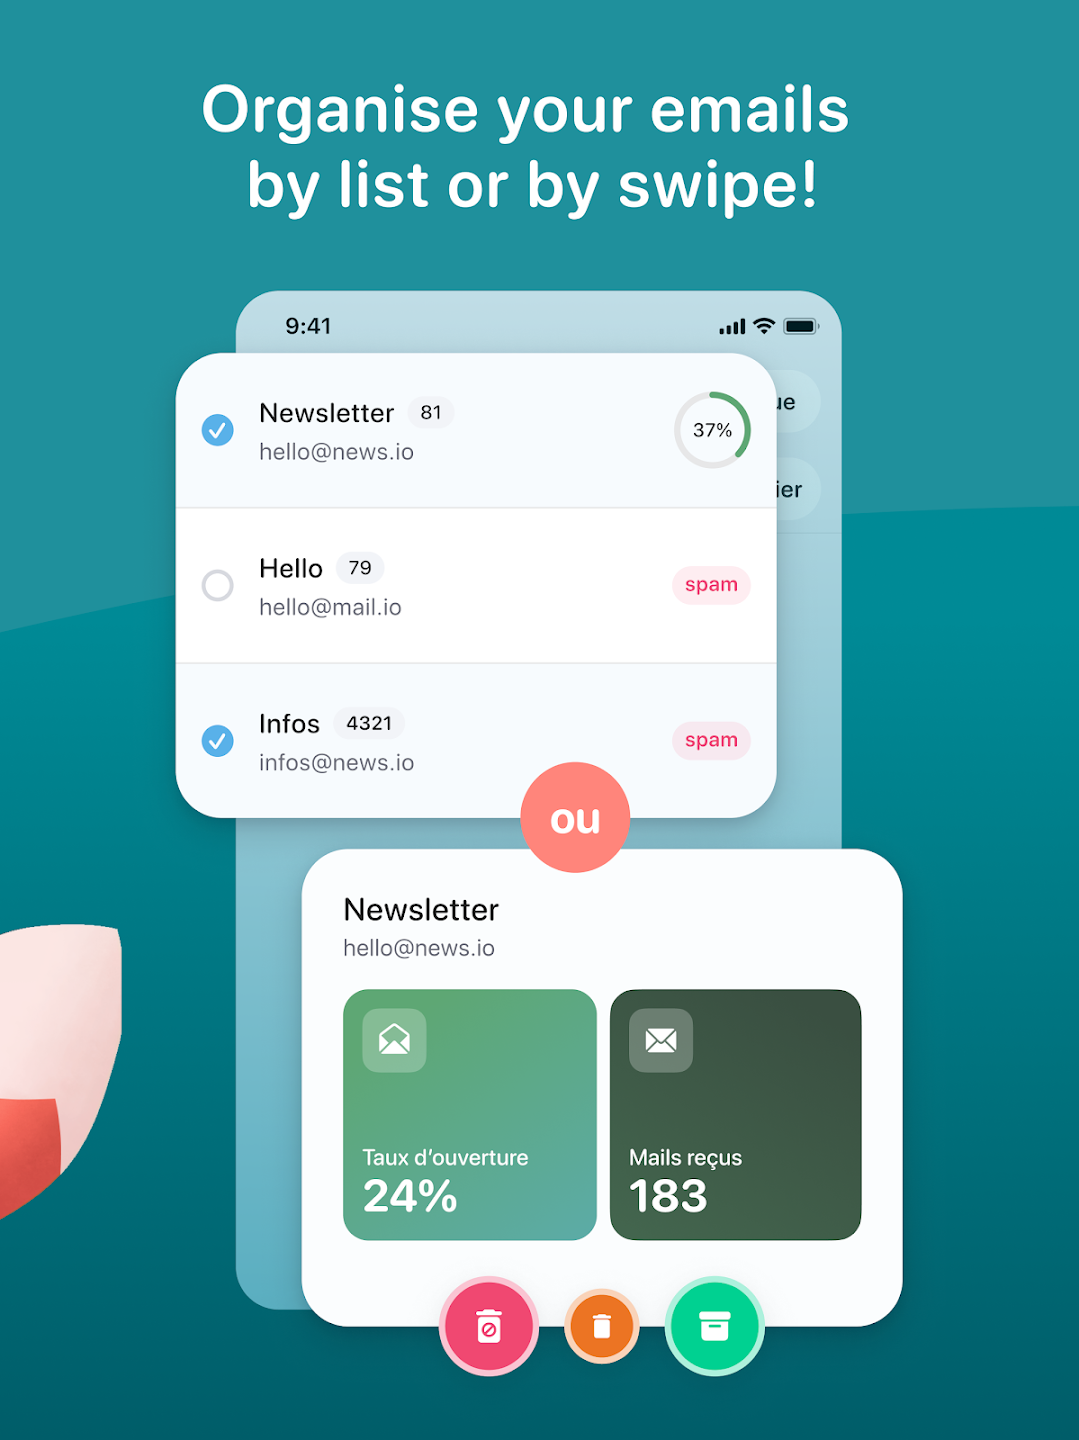 Cleanfox – Mail & Spam Cleaner